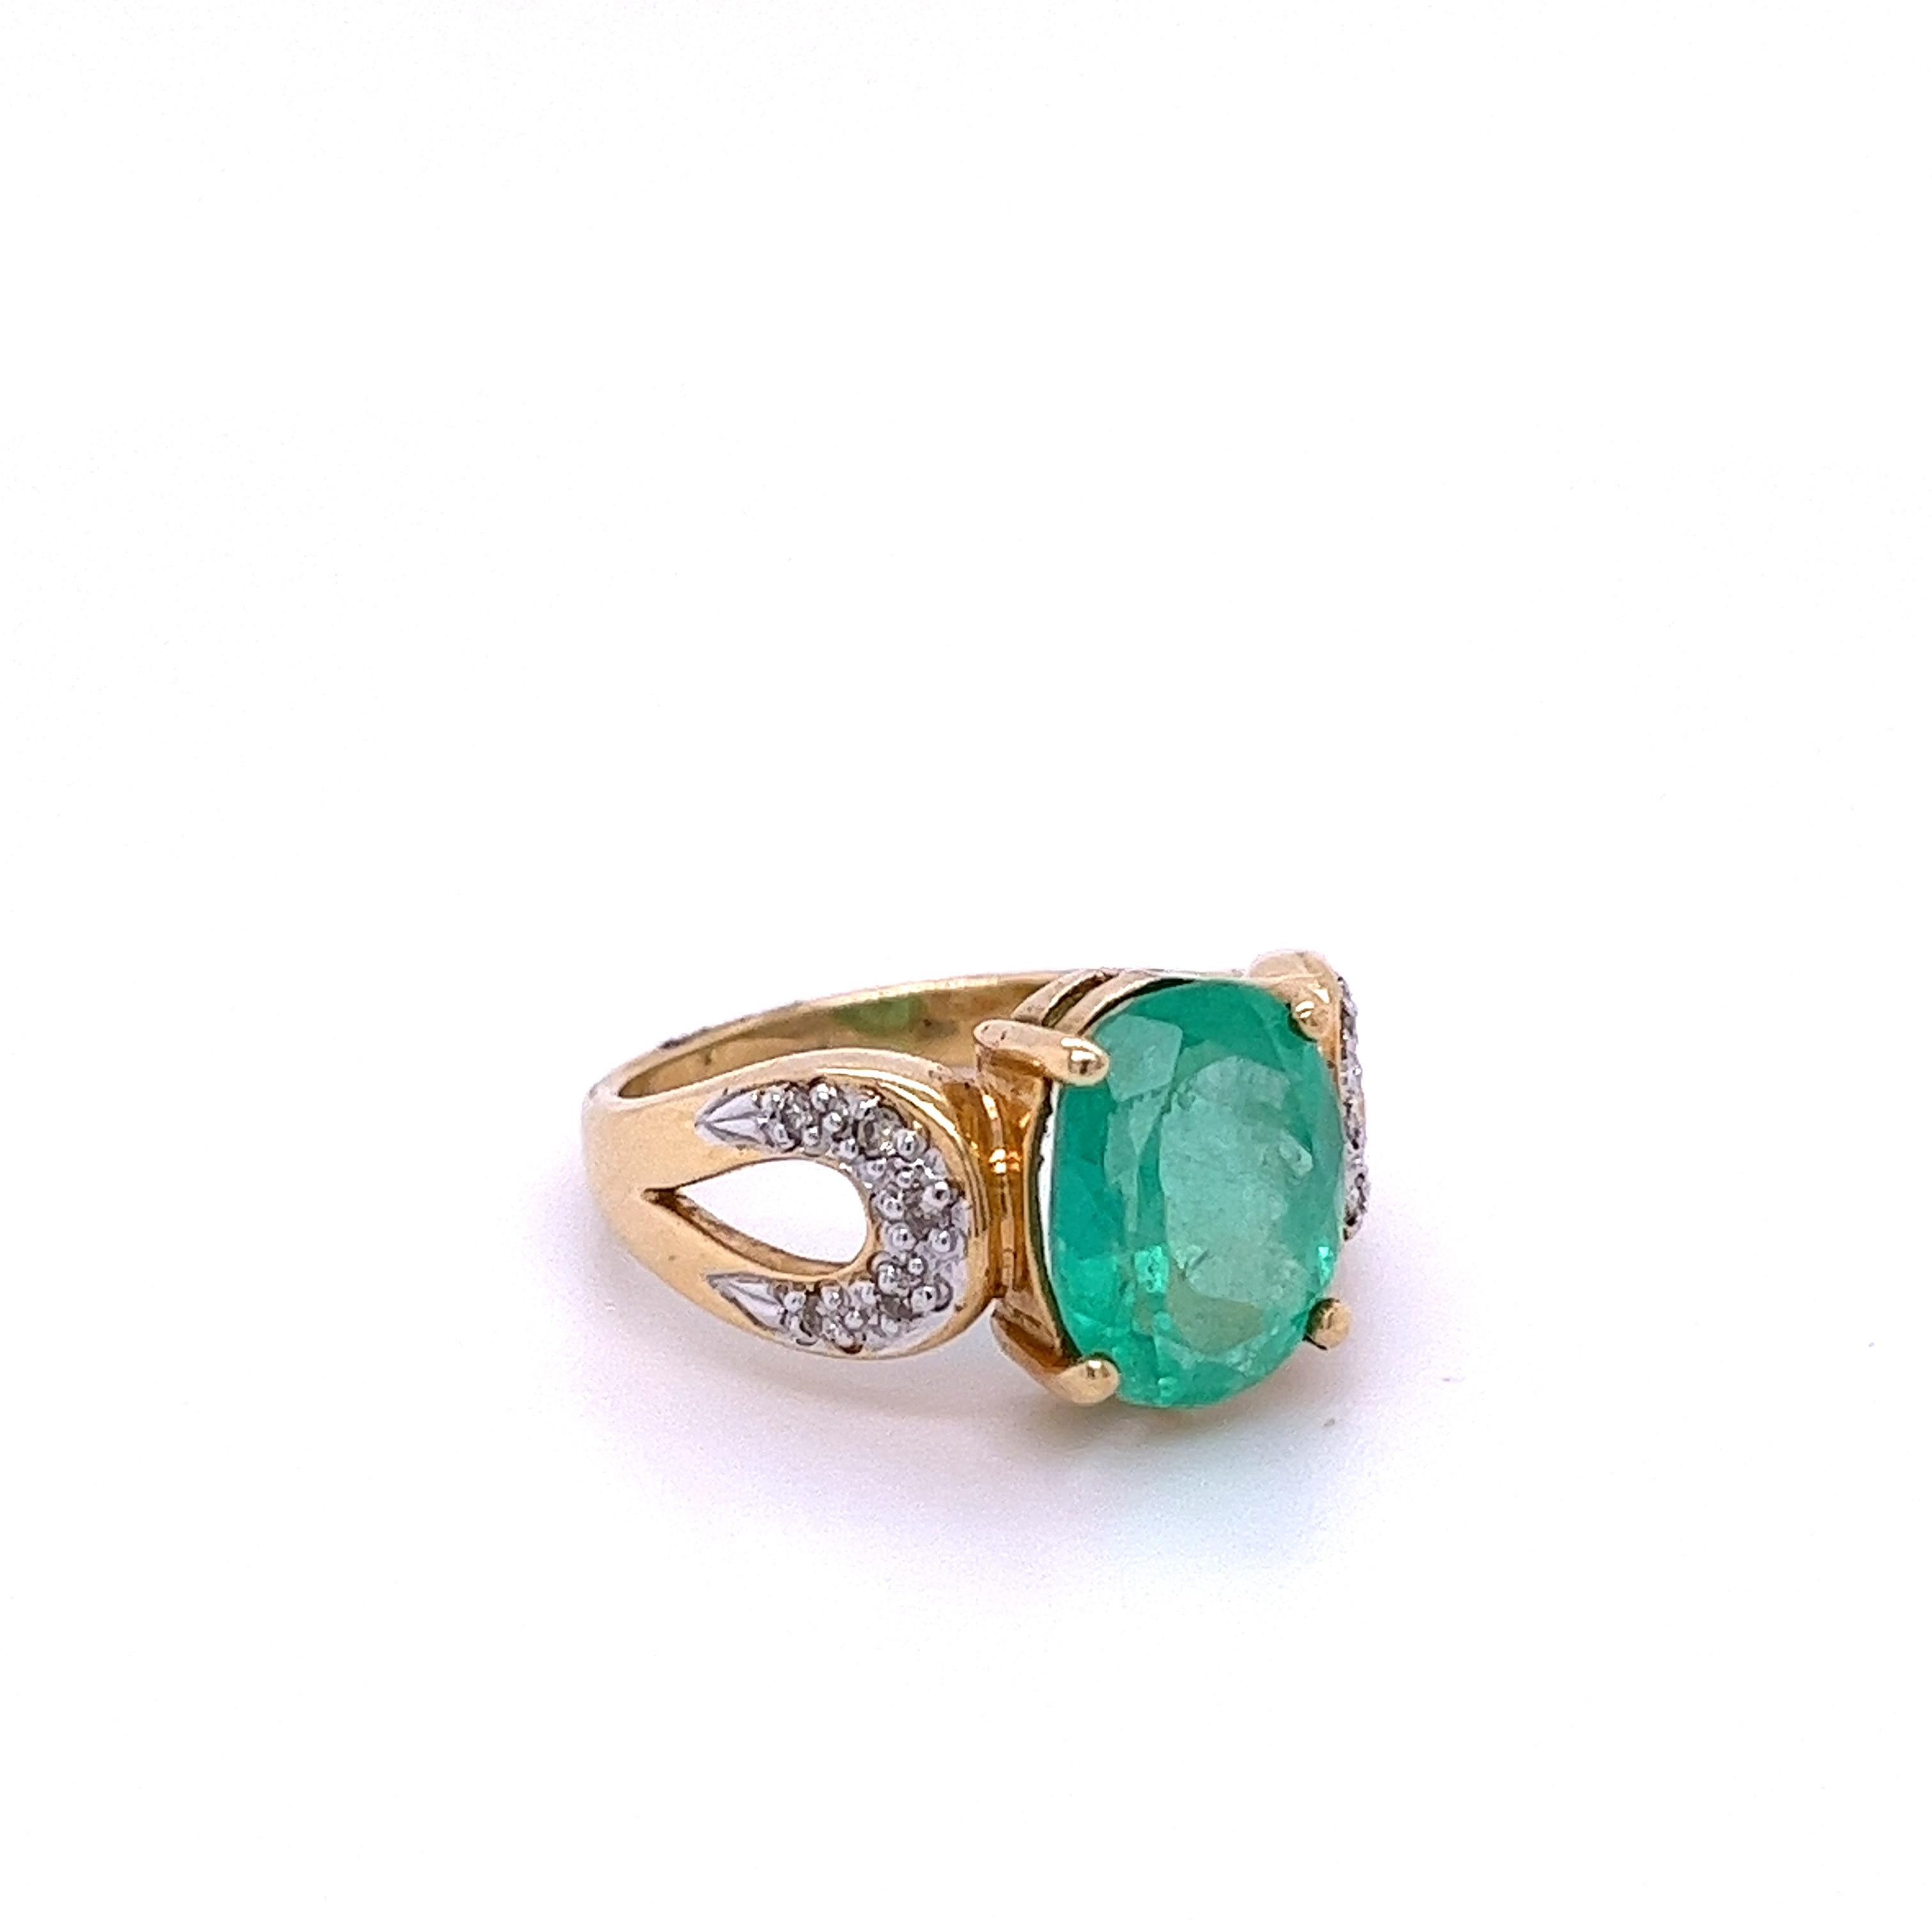 Art Deco 3 carat Oval Cut Colombian Emerald and Diamond Vintage Ring in 14k Yellow Gold For Sale